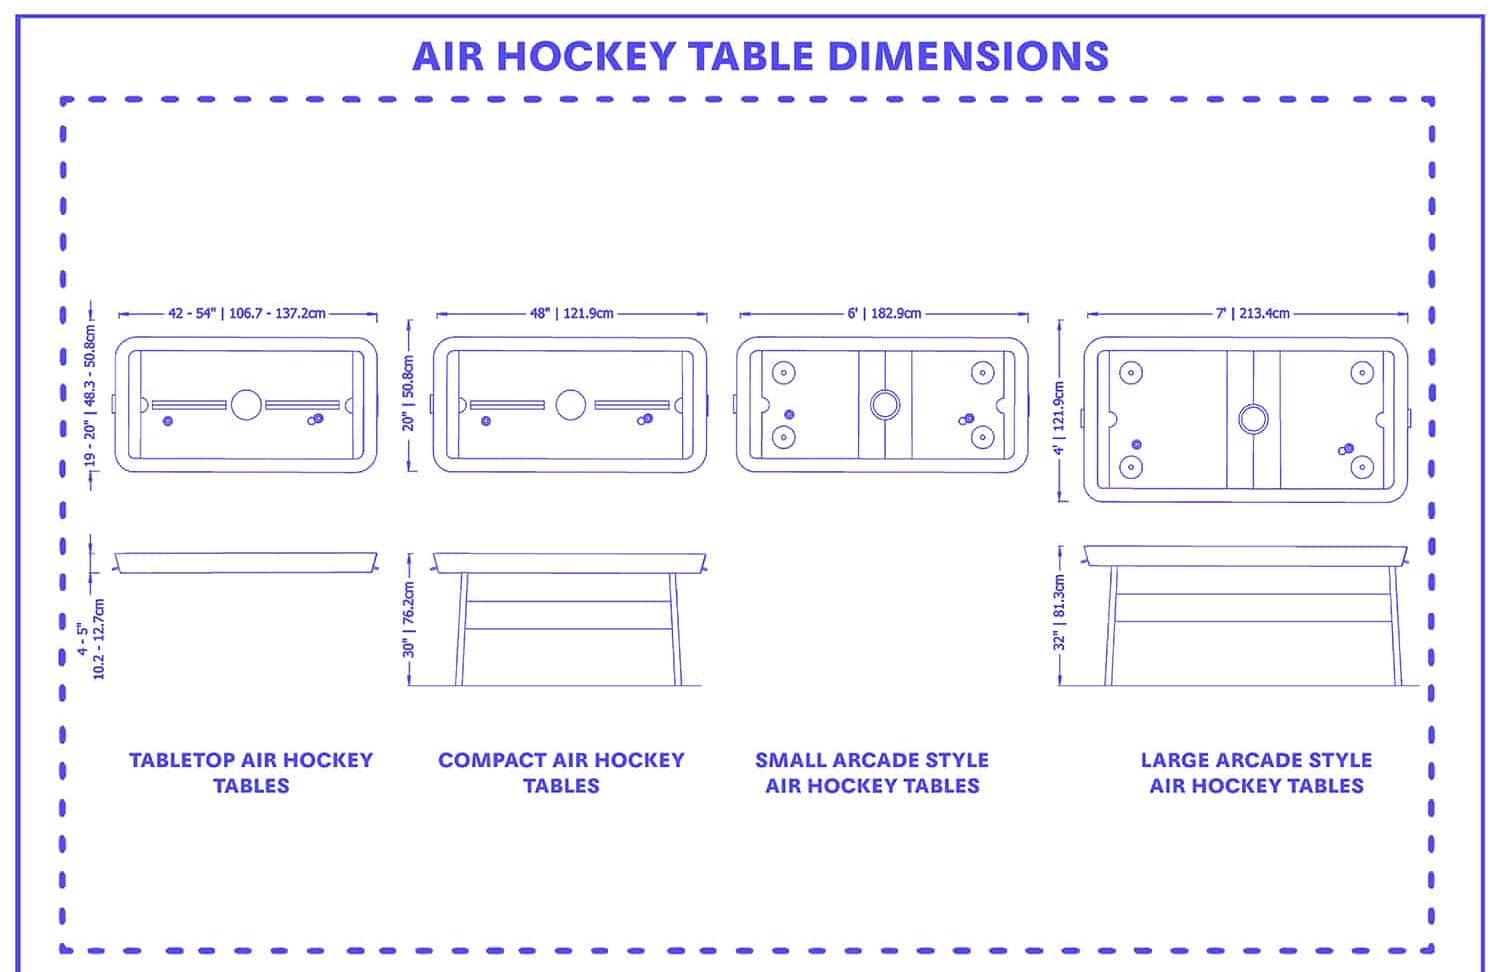 Air Hockey Table dimensions poster